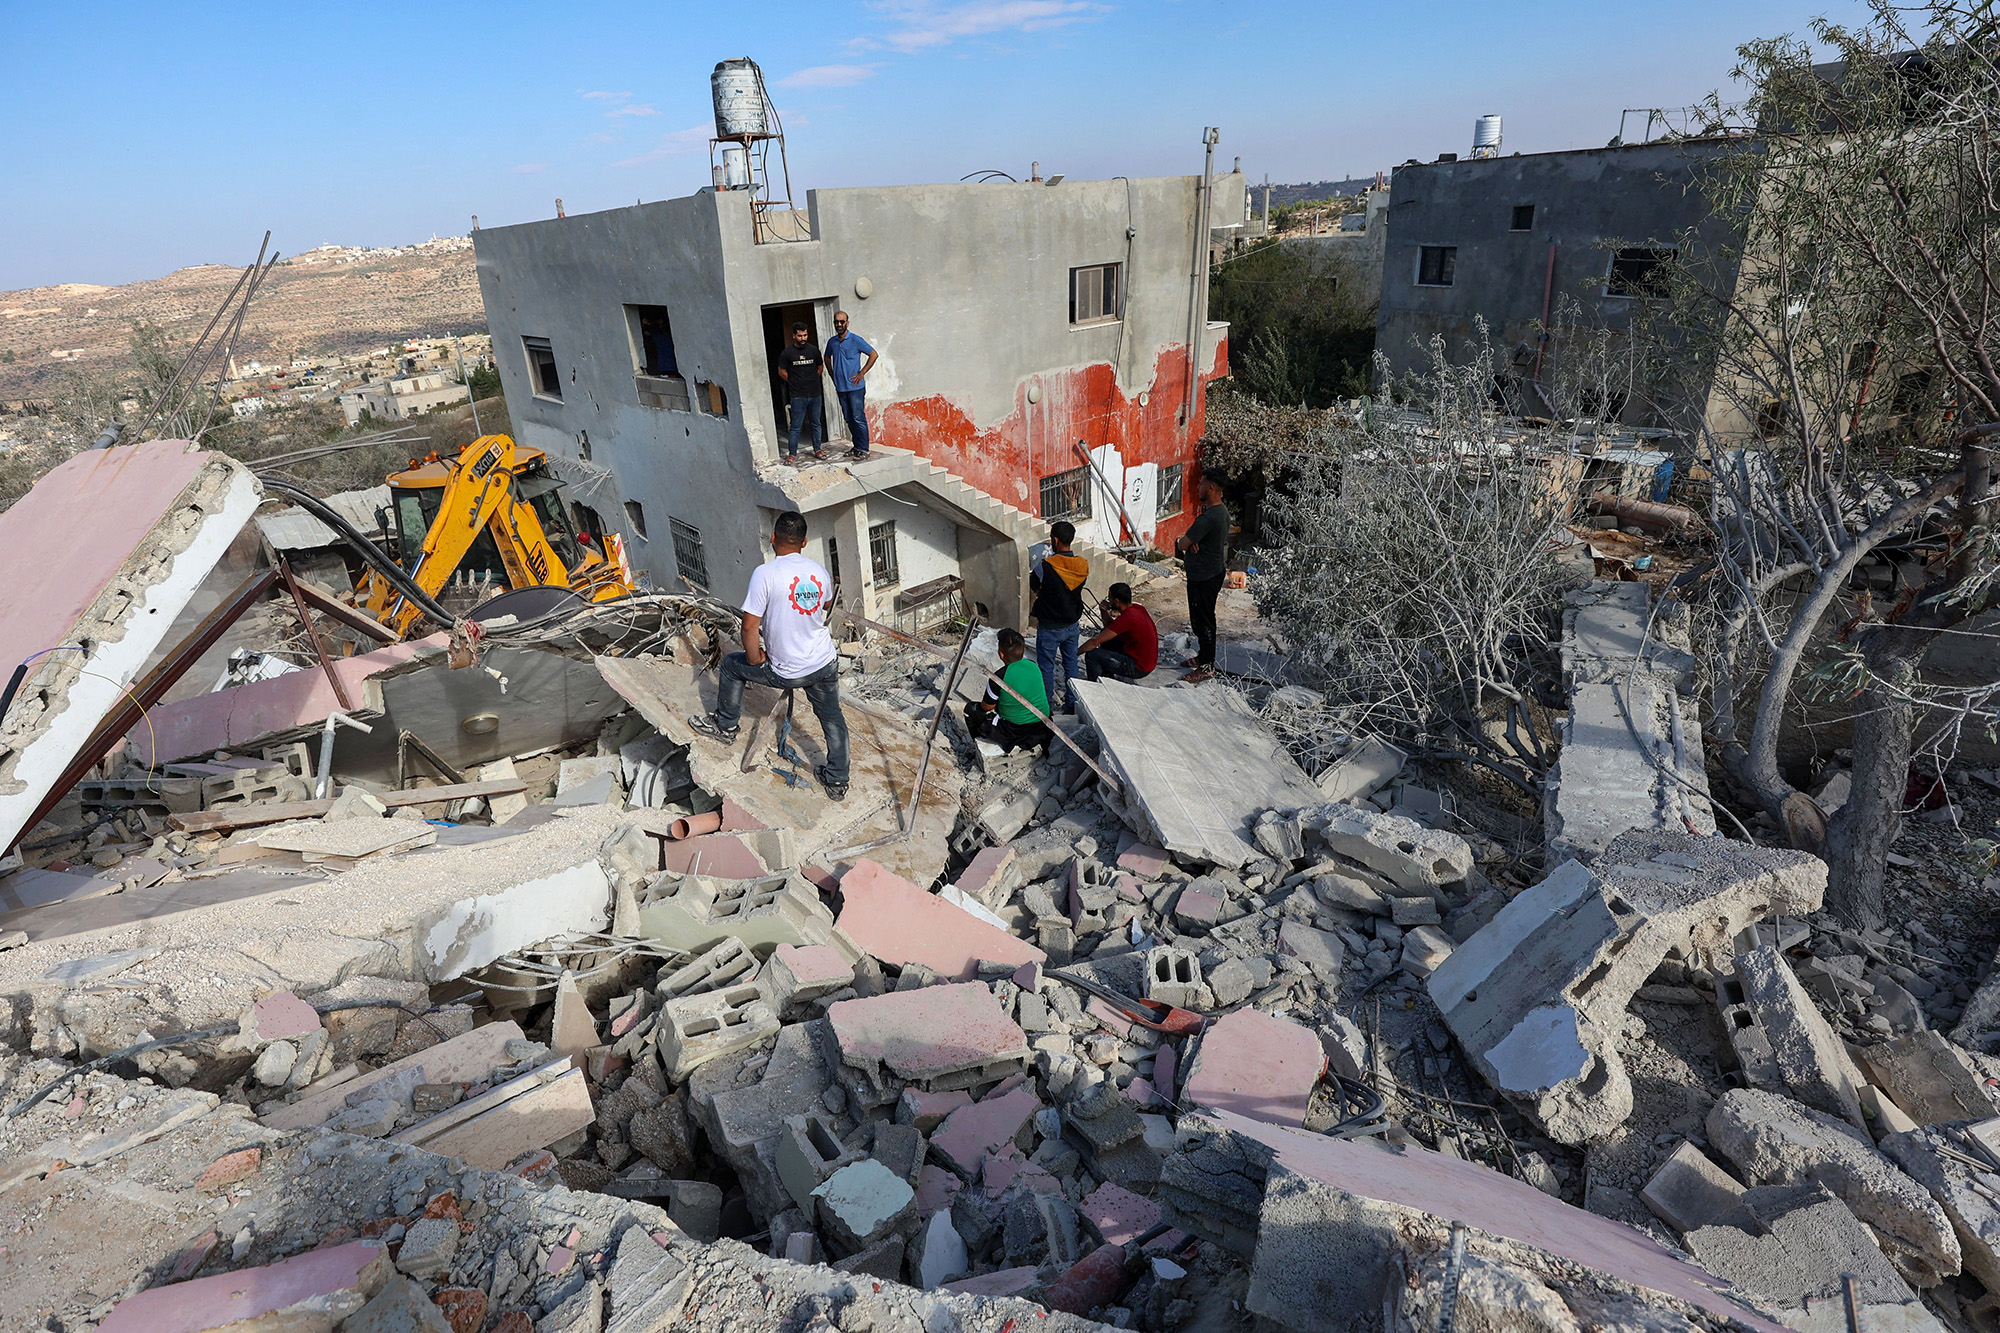 Palestinians look on as an excavator clears the rubble of the house of the deputy chief of Hamas' politcal bureau Saleh al-Aruri after it was demolished by Israeli forces in Arura village in the occupied West Bank on October 31.